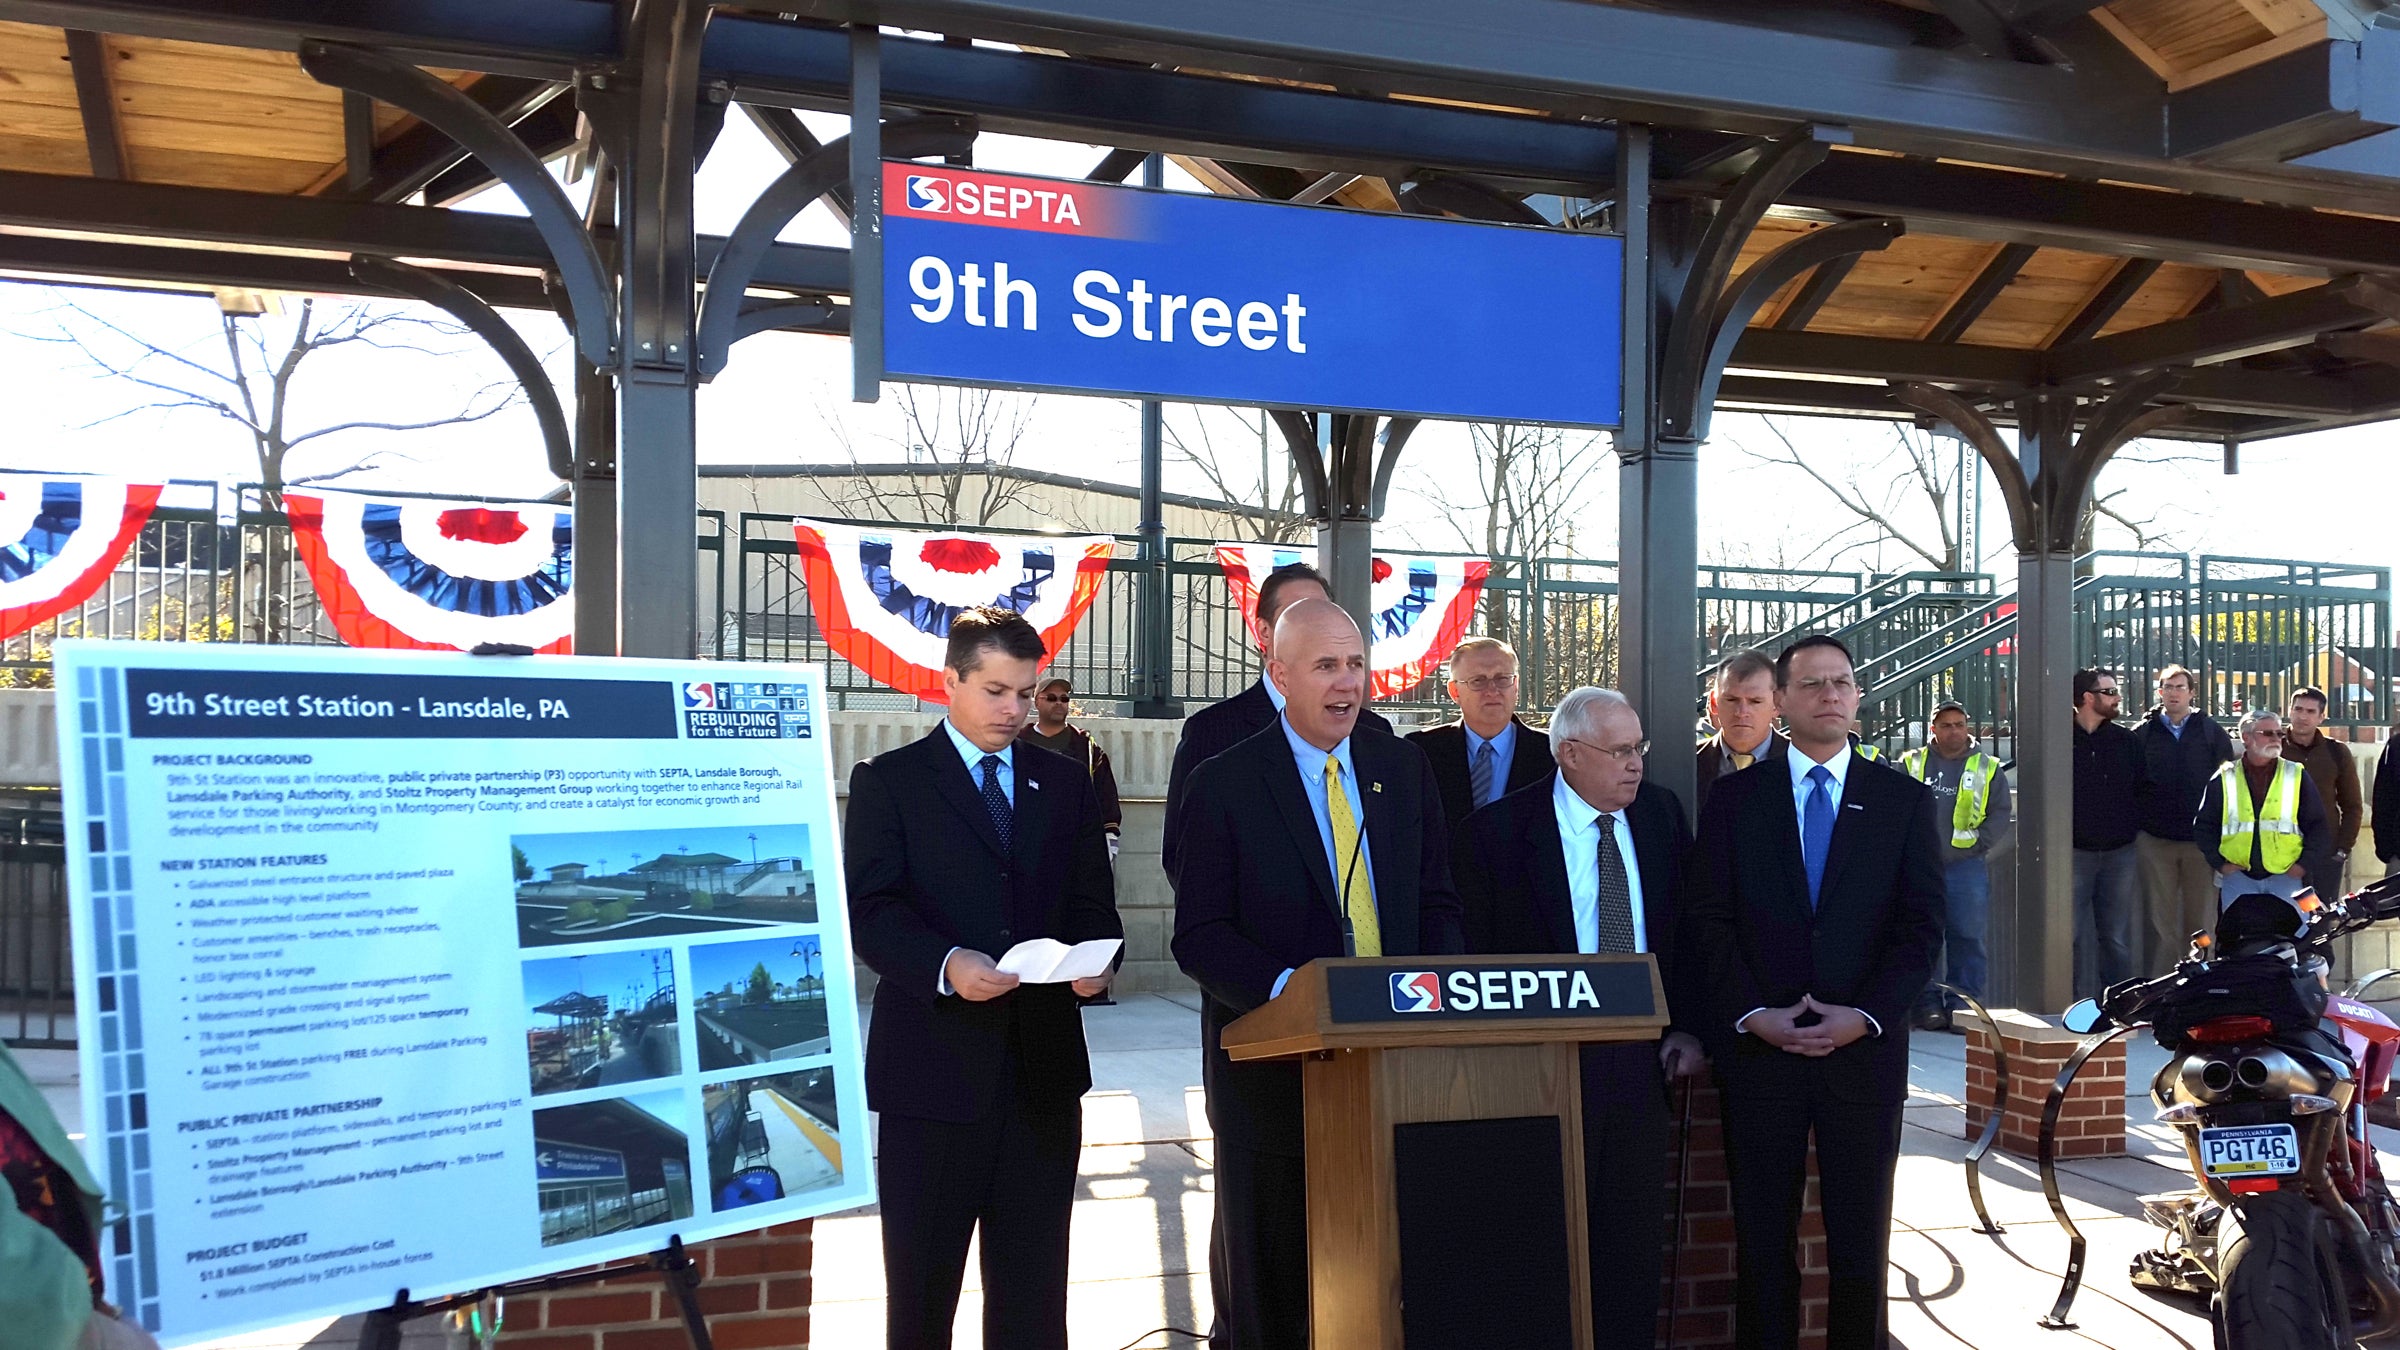  SEPTA general manager Jeff Knueppel introduces Lansdale's new Ninth Street Station, as, from left, Congressman Brendan Boyle, Lansdale Borough Manager Jacob Ziegler, state Rep. Bob Godshall, SEPTA Assistant General Manager Robert Lund and Montgomery County Commissioner Josh Shapiro look on. (Laura Benshoff/WHYY)  